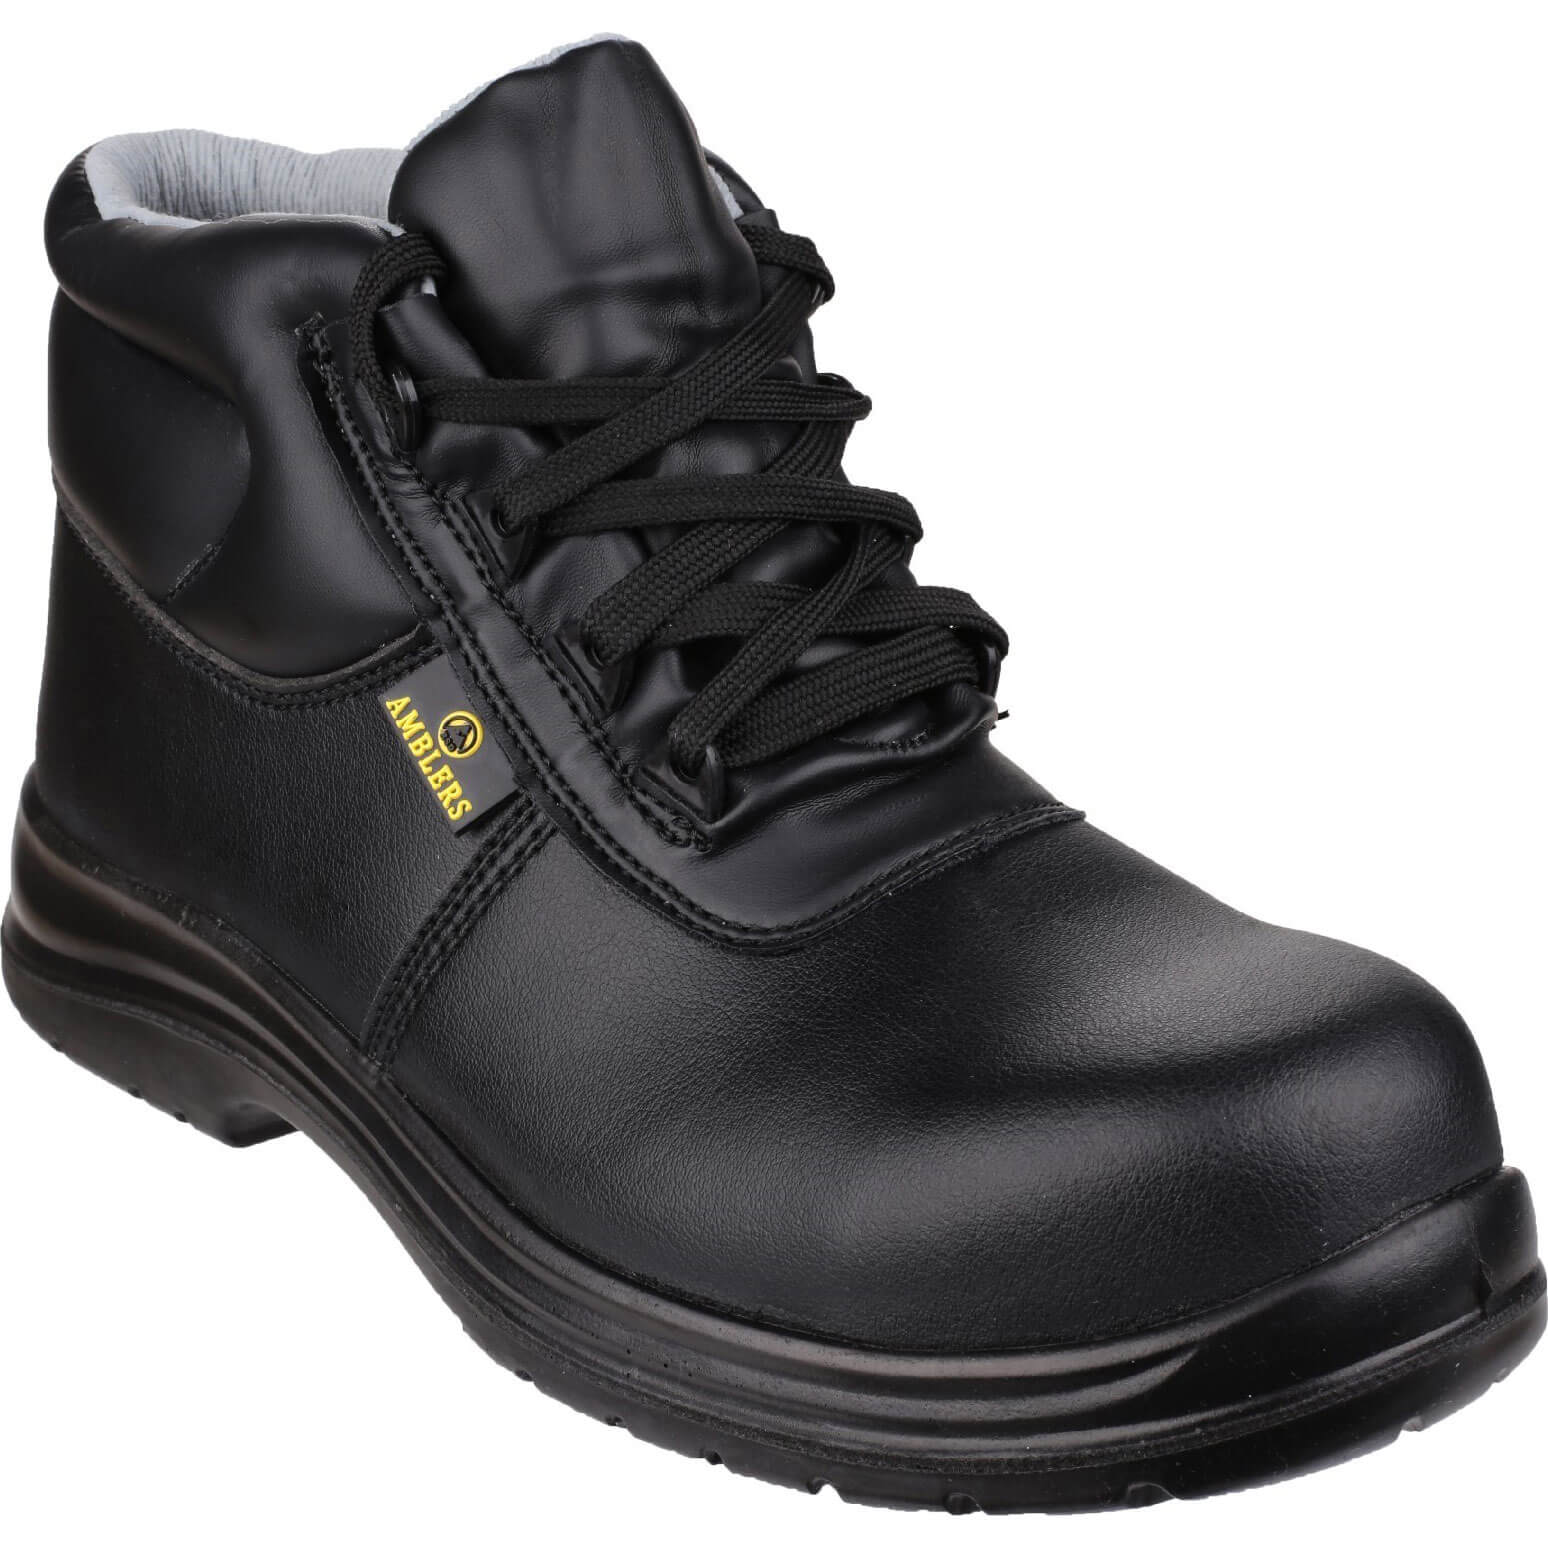 Photo of Amblers Mens Safety Fs663 Metal-free Water-resistant Safety Boots Black Size 4